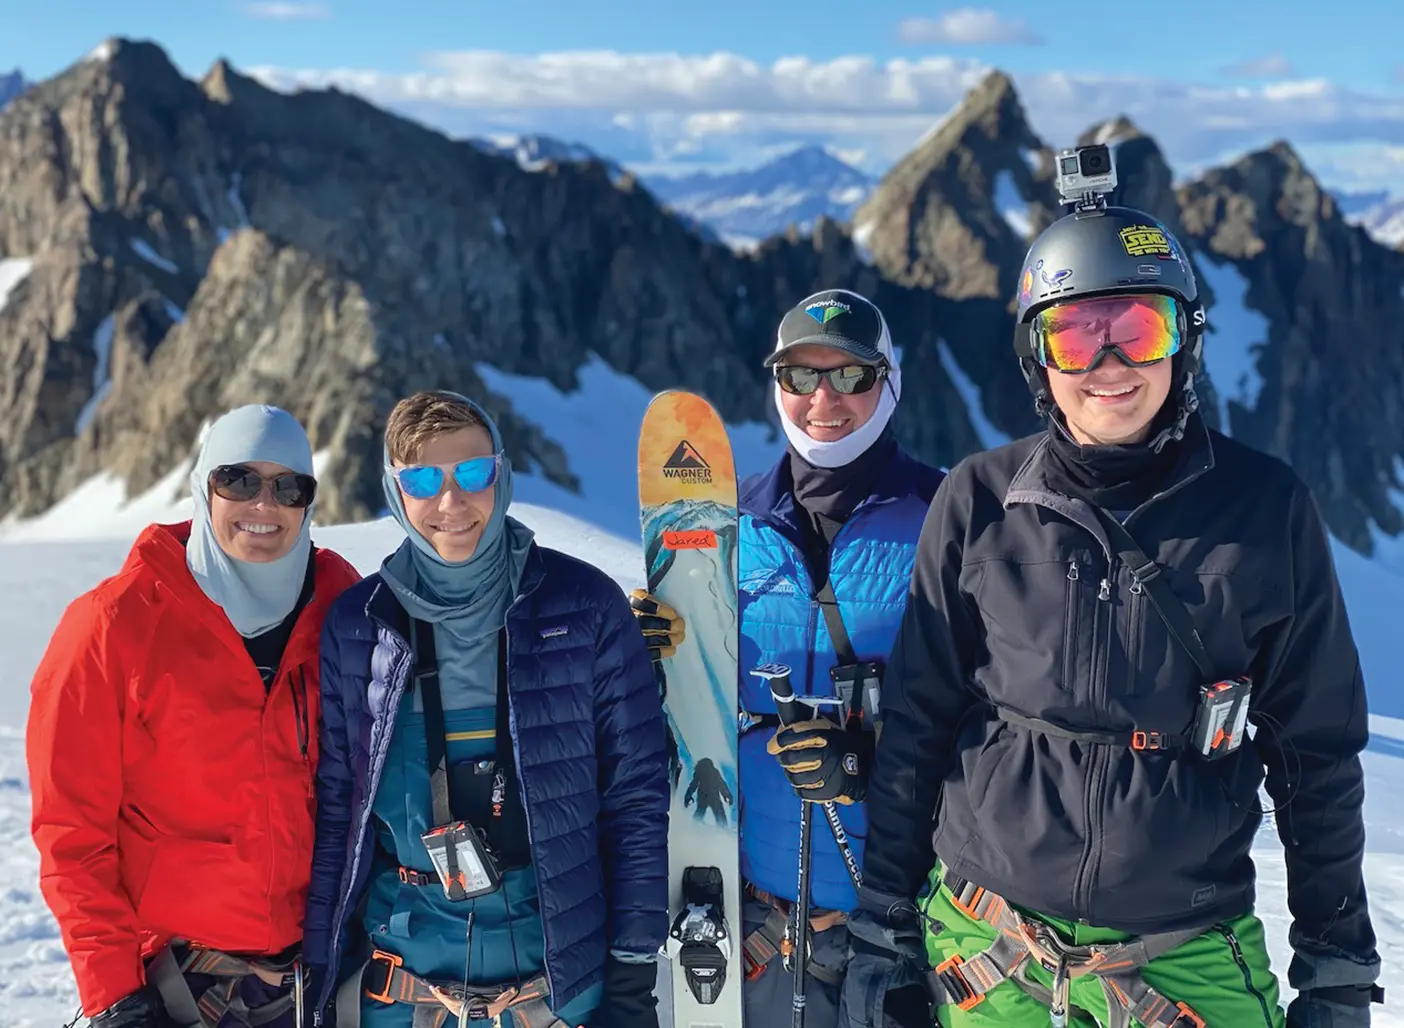 Nielsen and her family stand on a sunny mountain top in colorful ski clothing, all wearing highly reflective sunglasses.